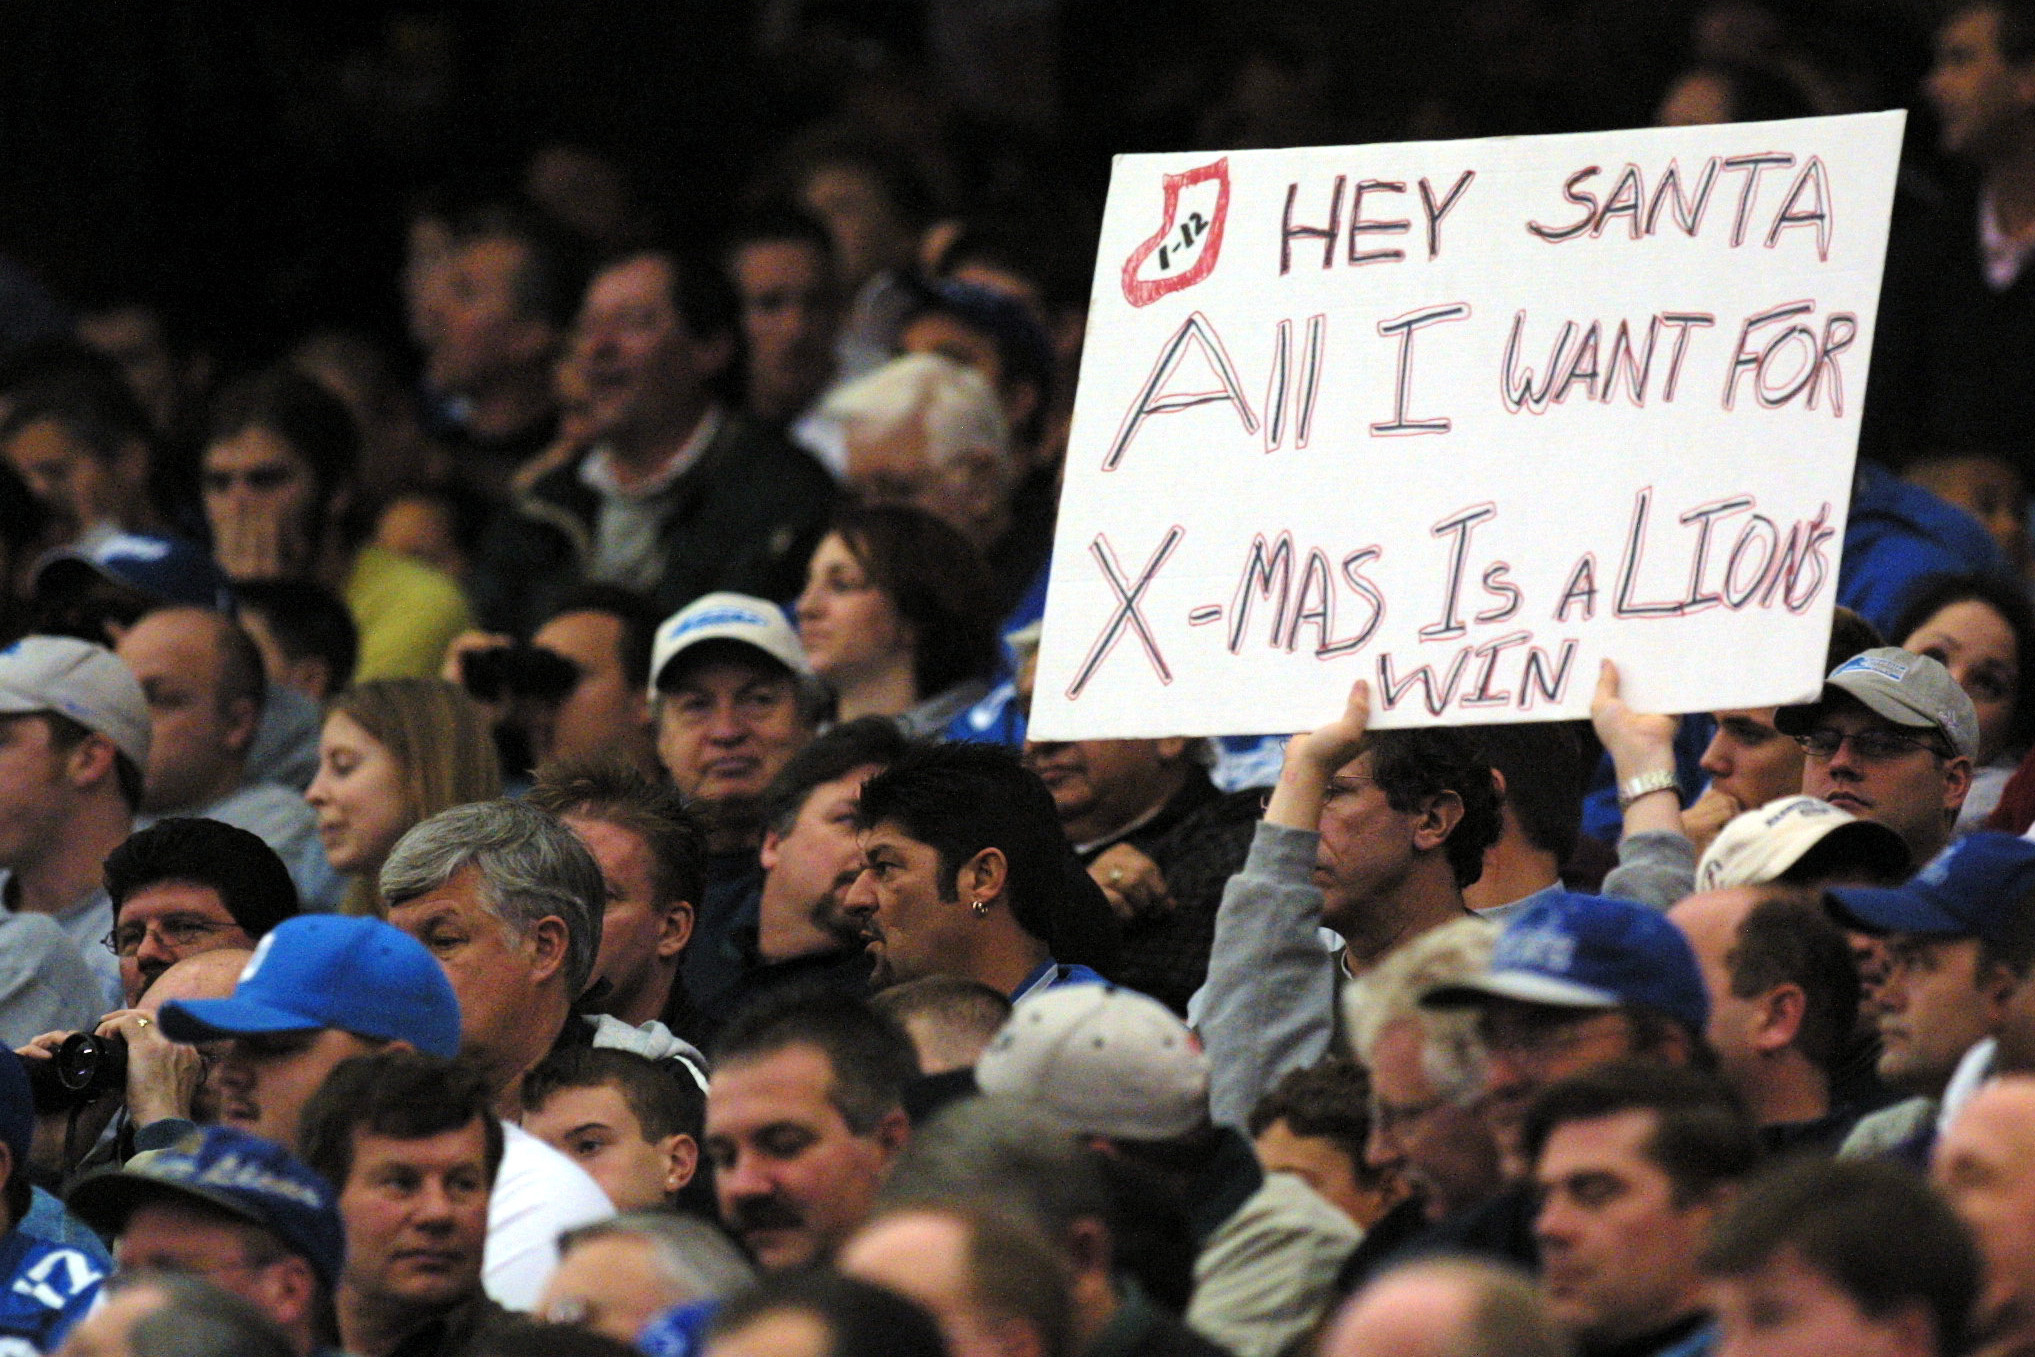 Lions fan's sign asking Santa for a win